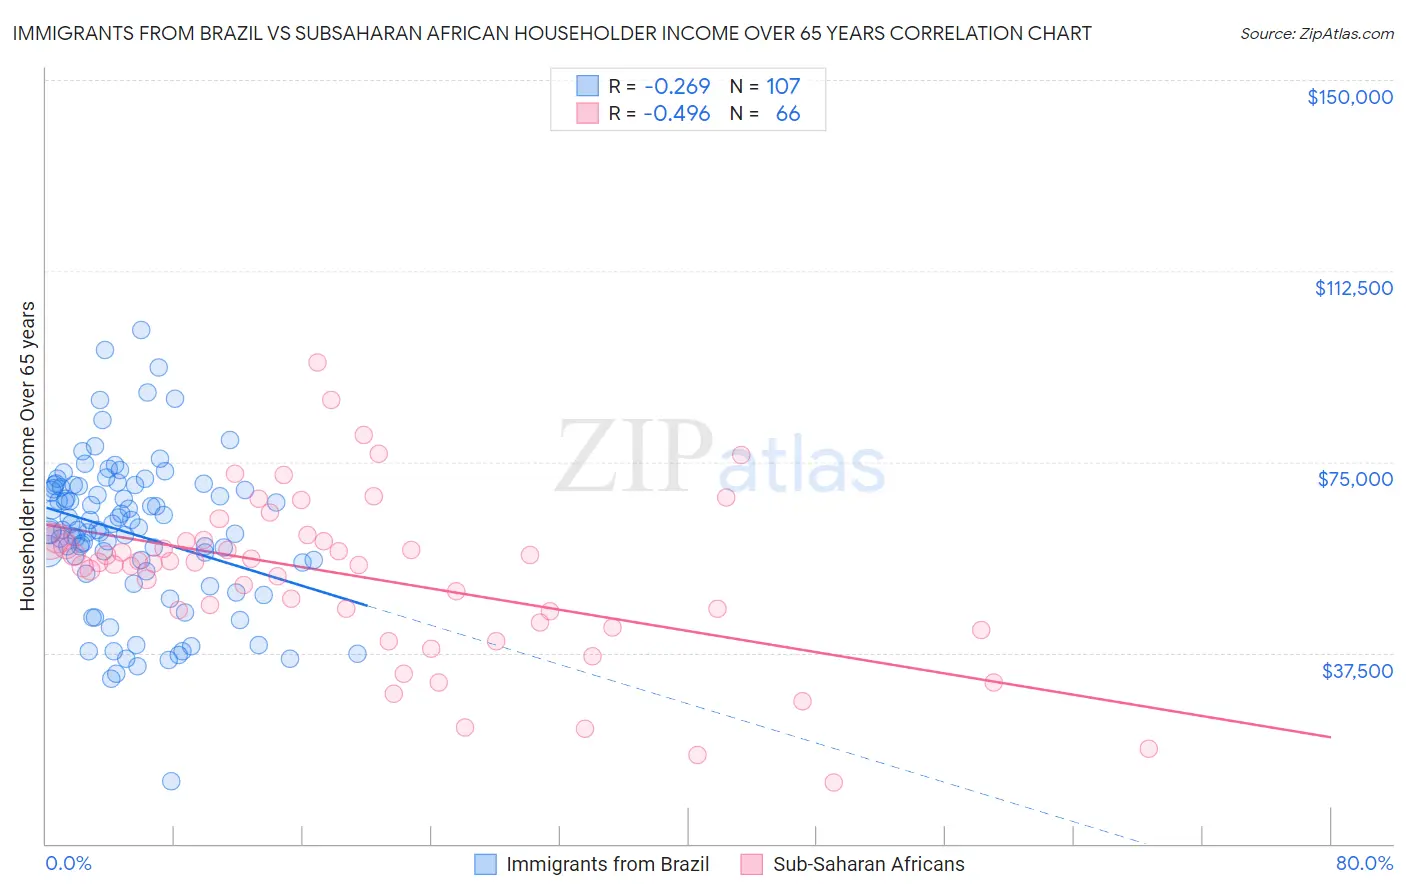 Immigrants from Brazil vs Subsaharan African Householder Income Over 65 years